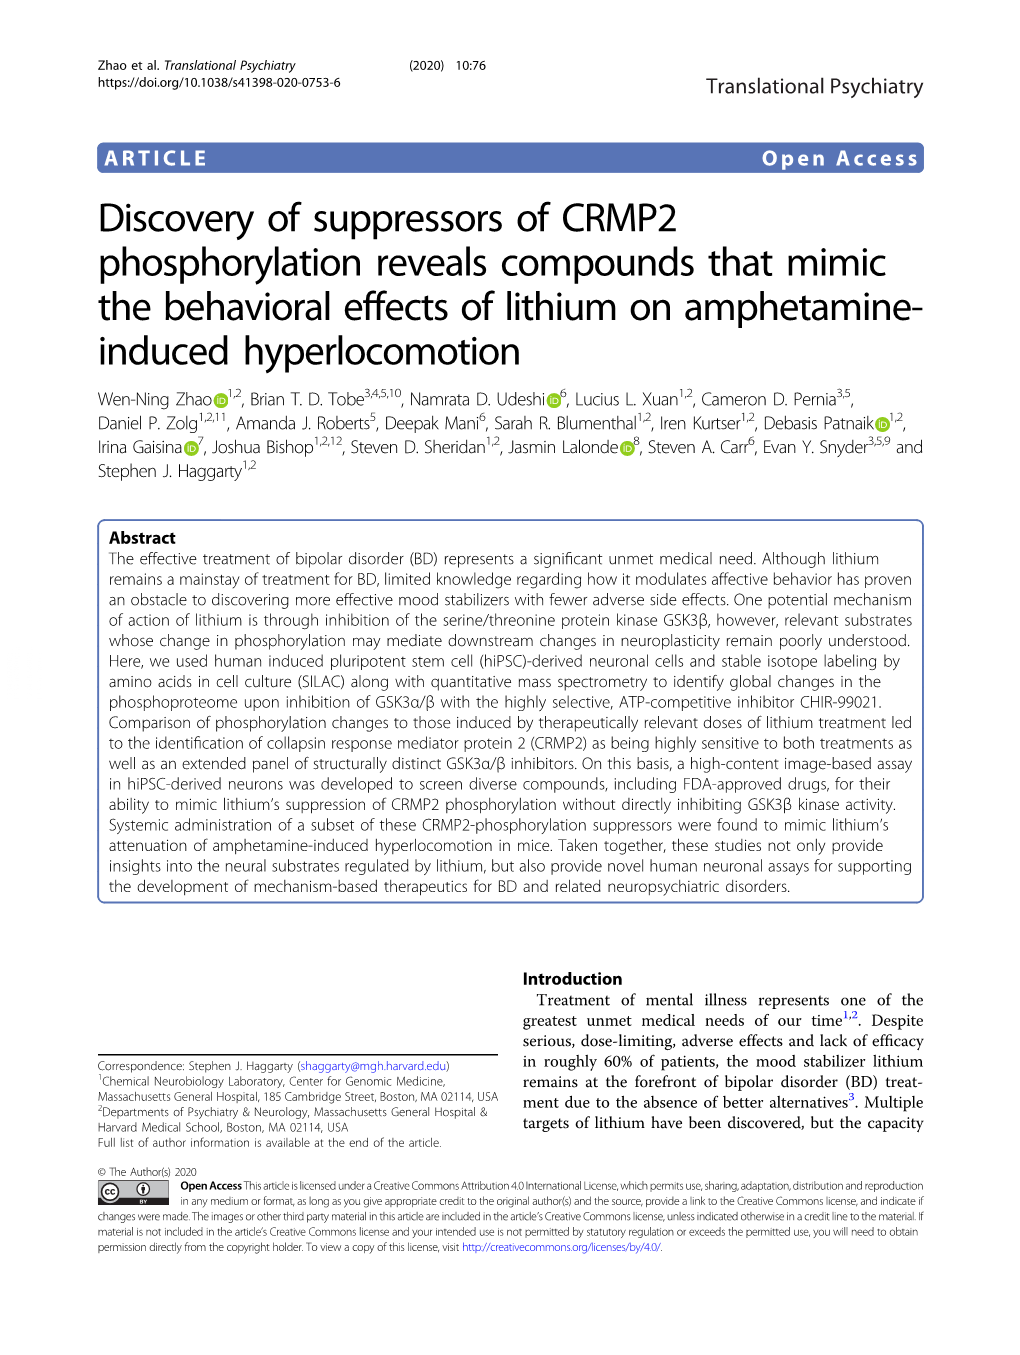 Discovery of Suppressors of CRMP2 Phosphorylation Reveals